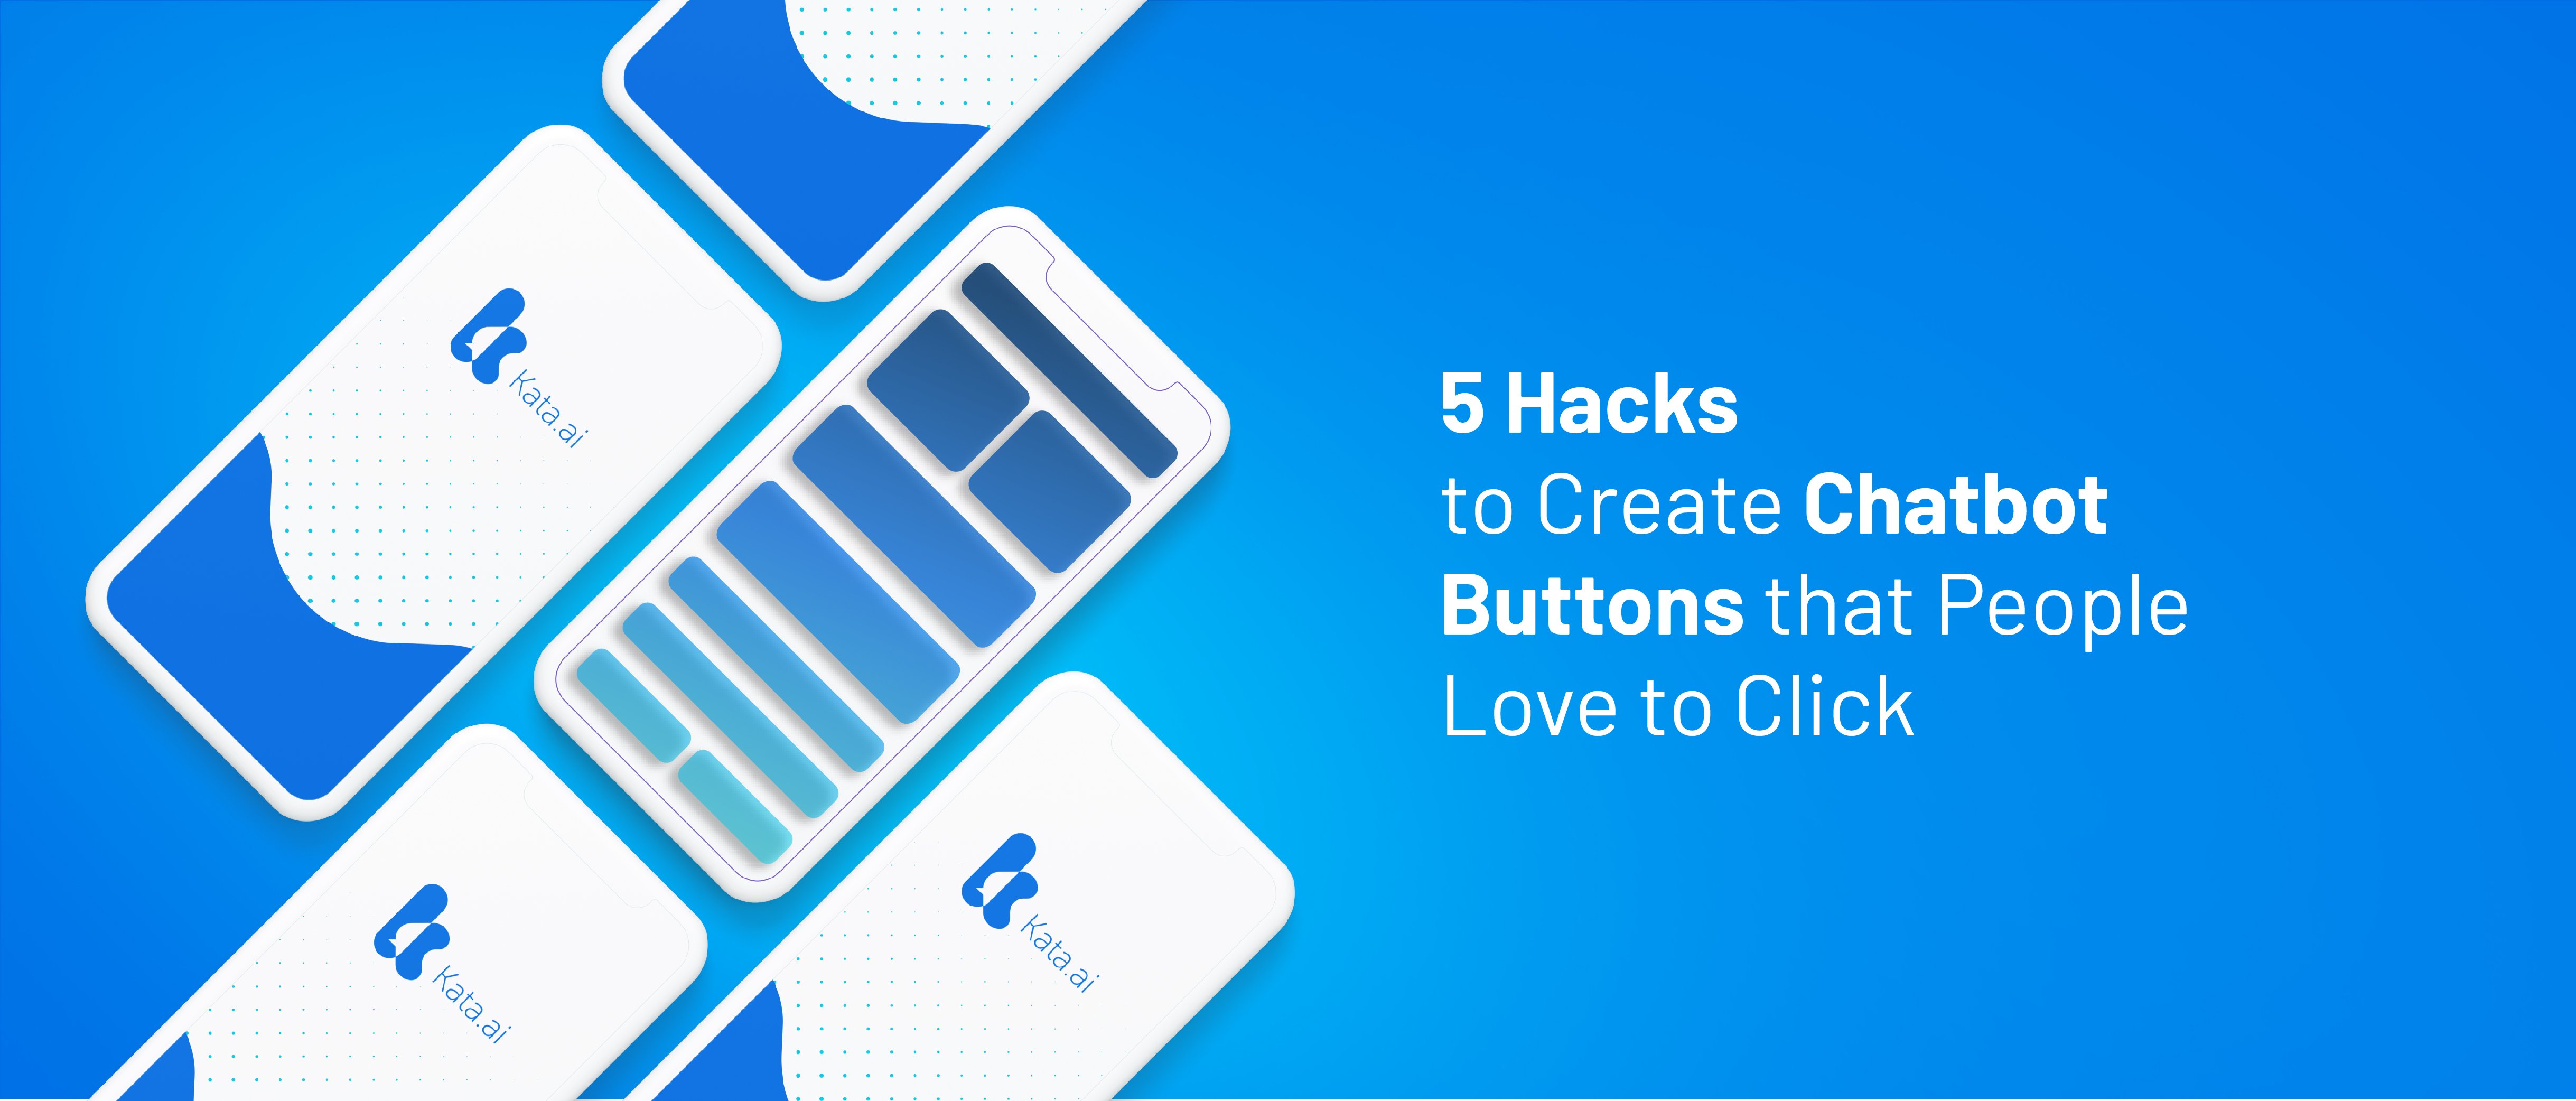 5 Hacks to Create Chatbot Buttons that People Love to Click